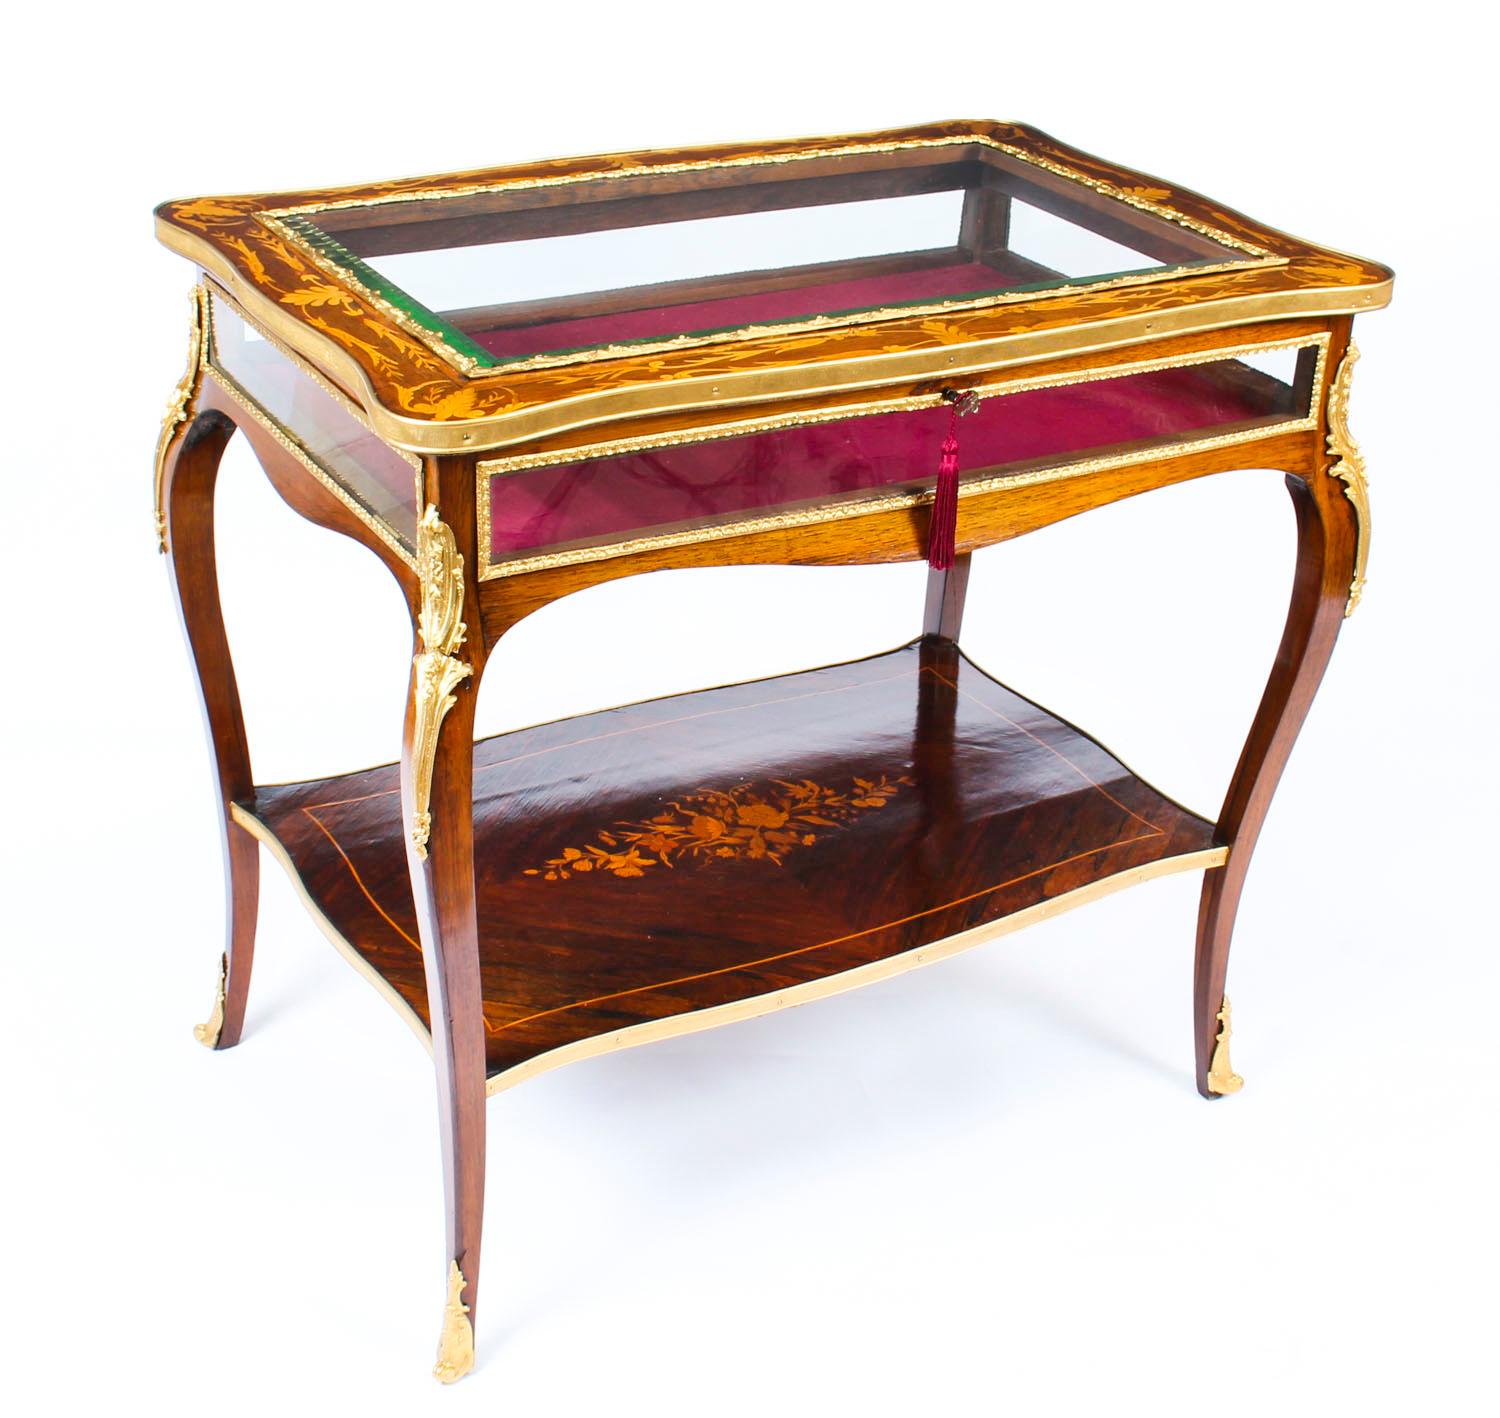 Antique French Ormolu-Mounted Marquetry Bijouterie Display Table, 19th Century 9